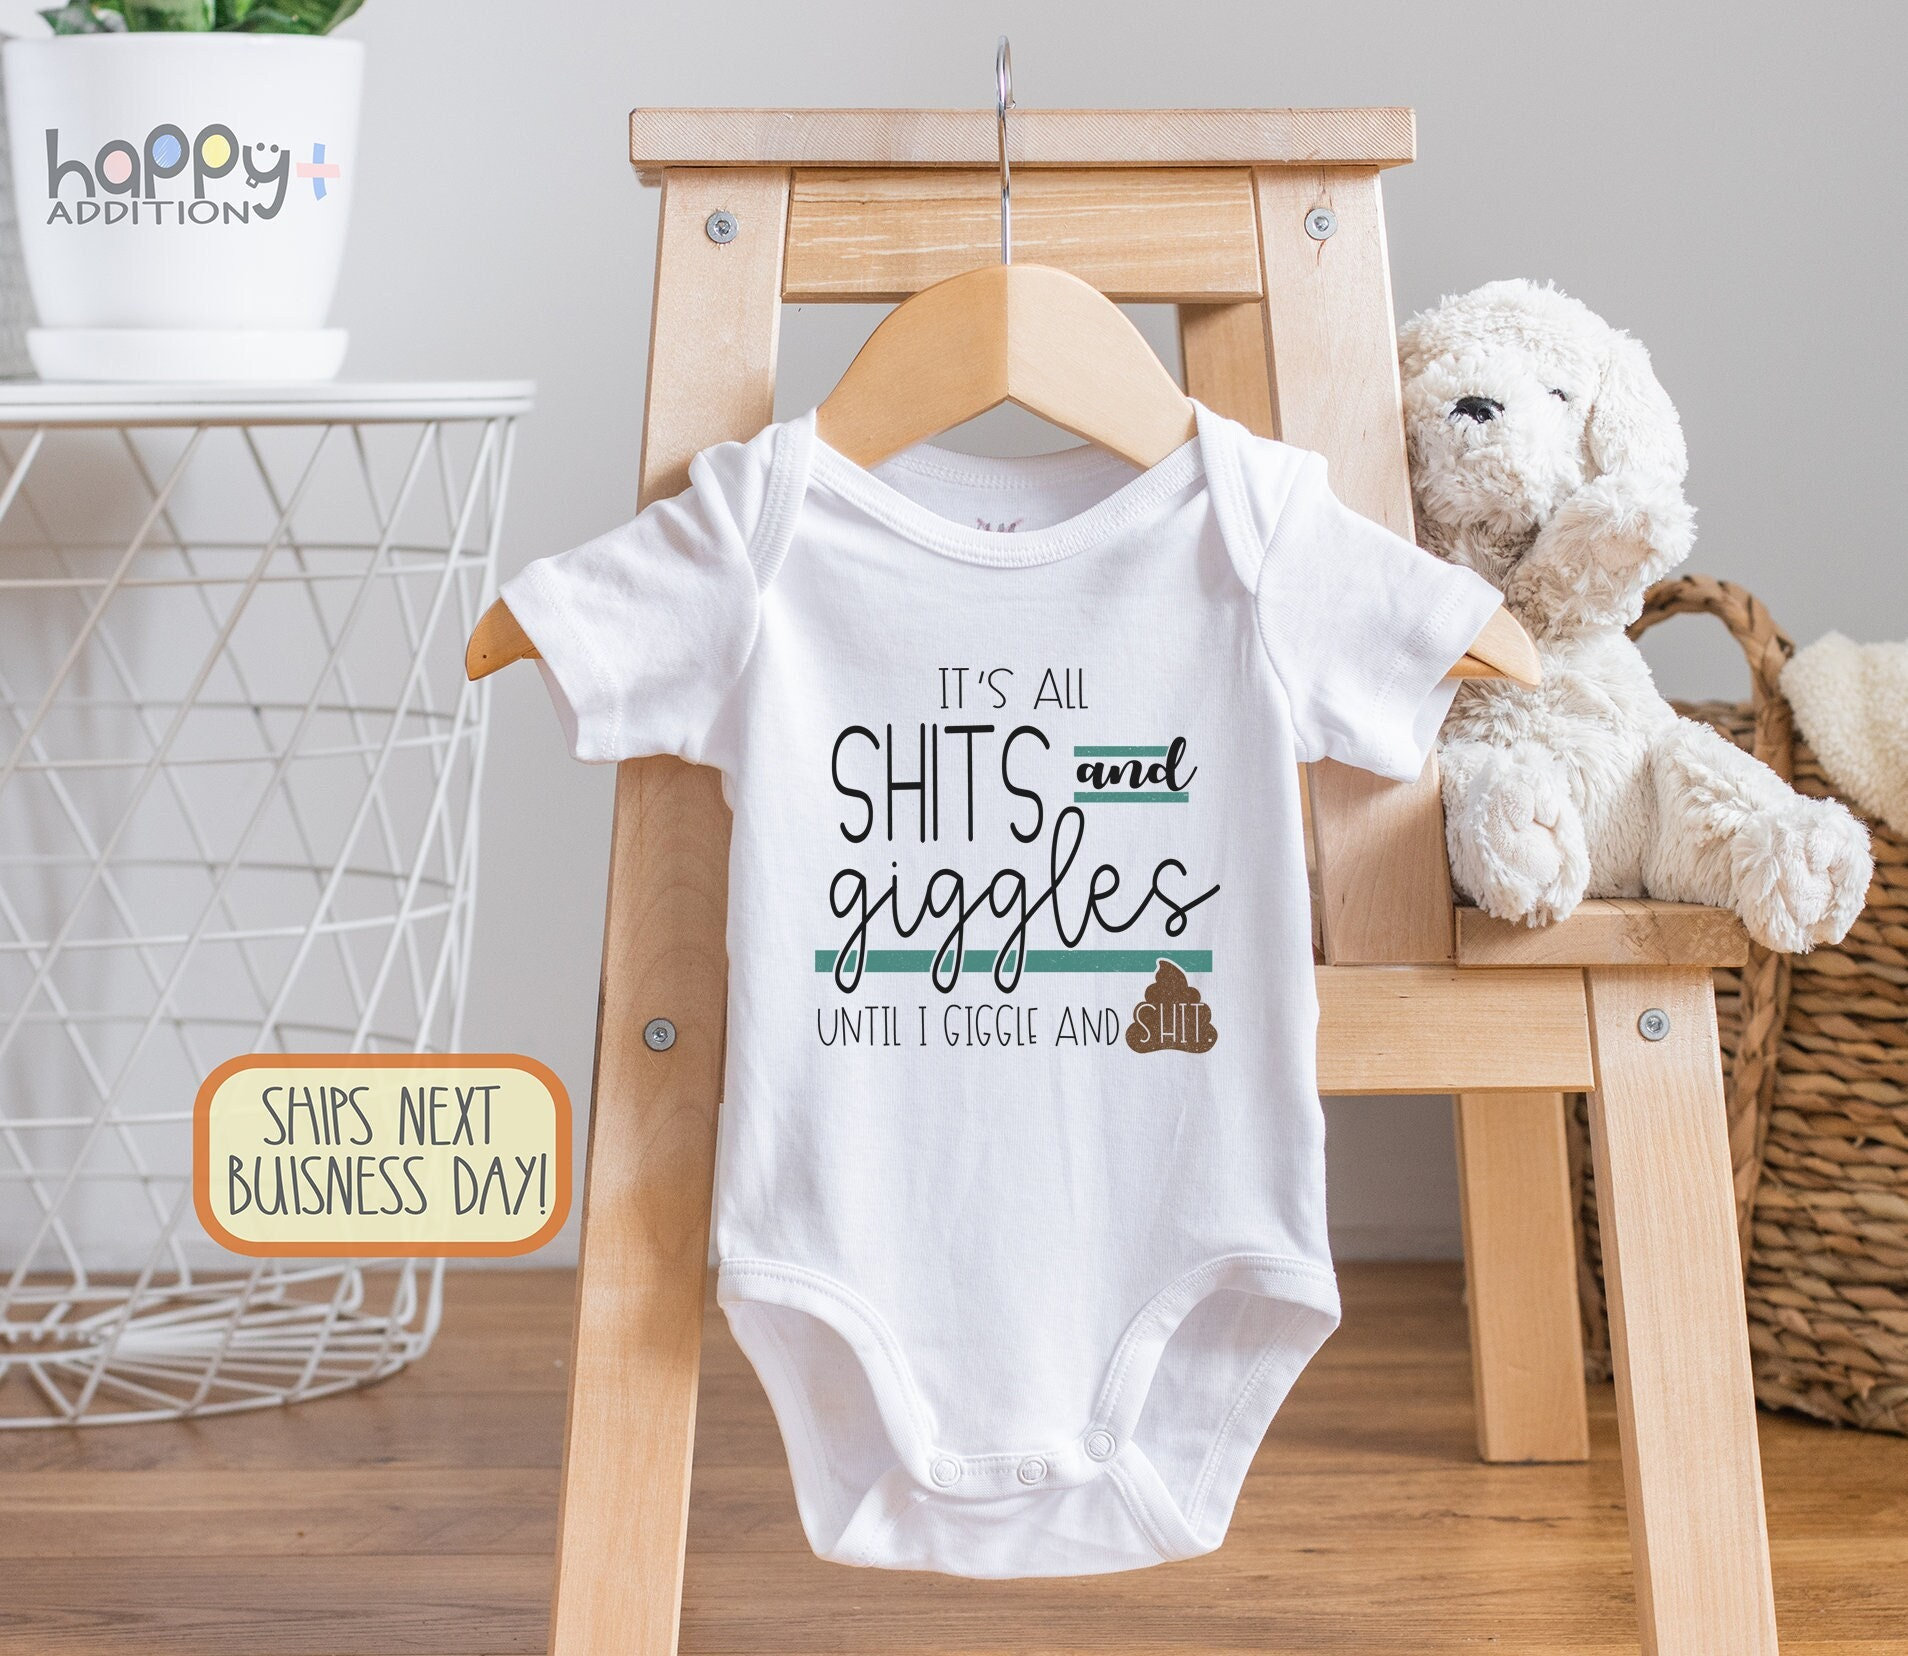 Funny Baby , It's All Shits and Giggles, Baby Shower Gift, Funny Baby  Clothes, Funny , New Mom Gift, Cute Niece Nephew, Onesie® 